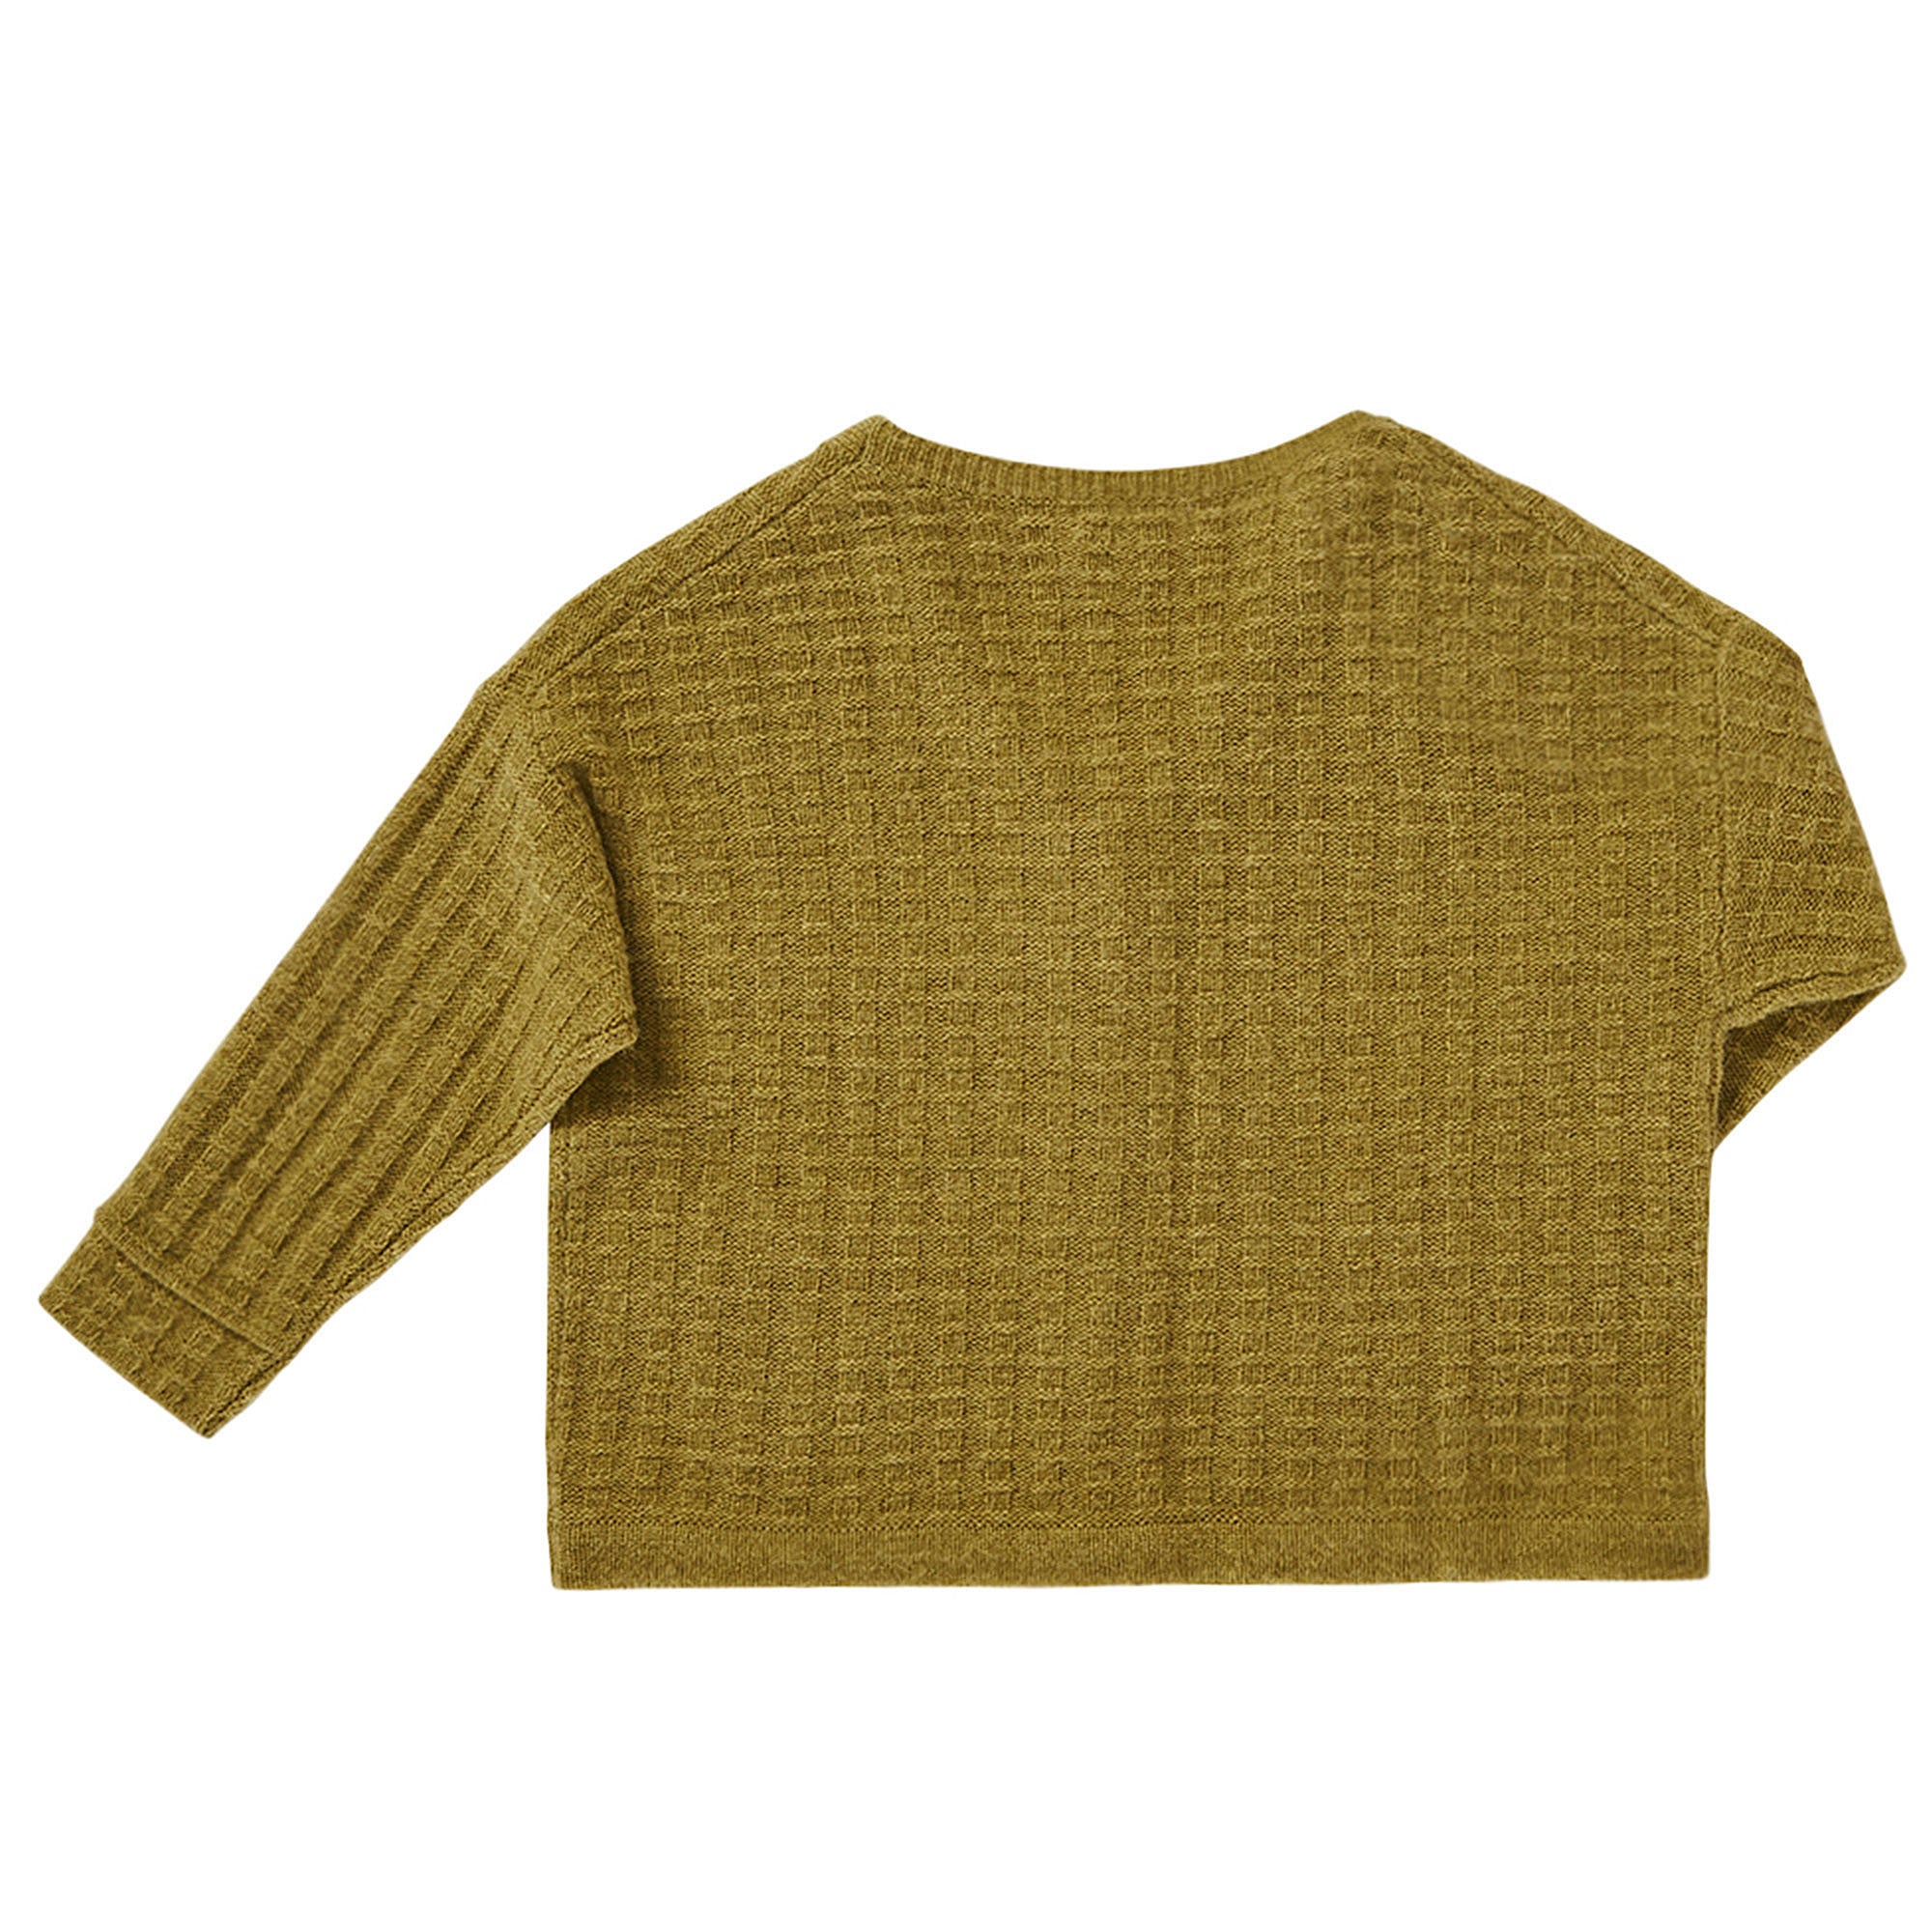 Boys Lime Knitted Wool Cardigans With Patch Pocket - CÉMAROSE | Children's Fashion Store - 2